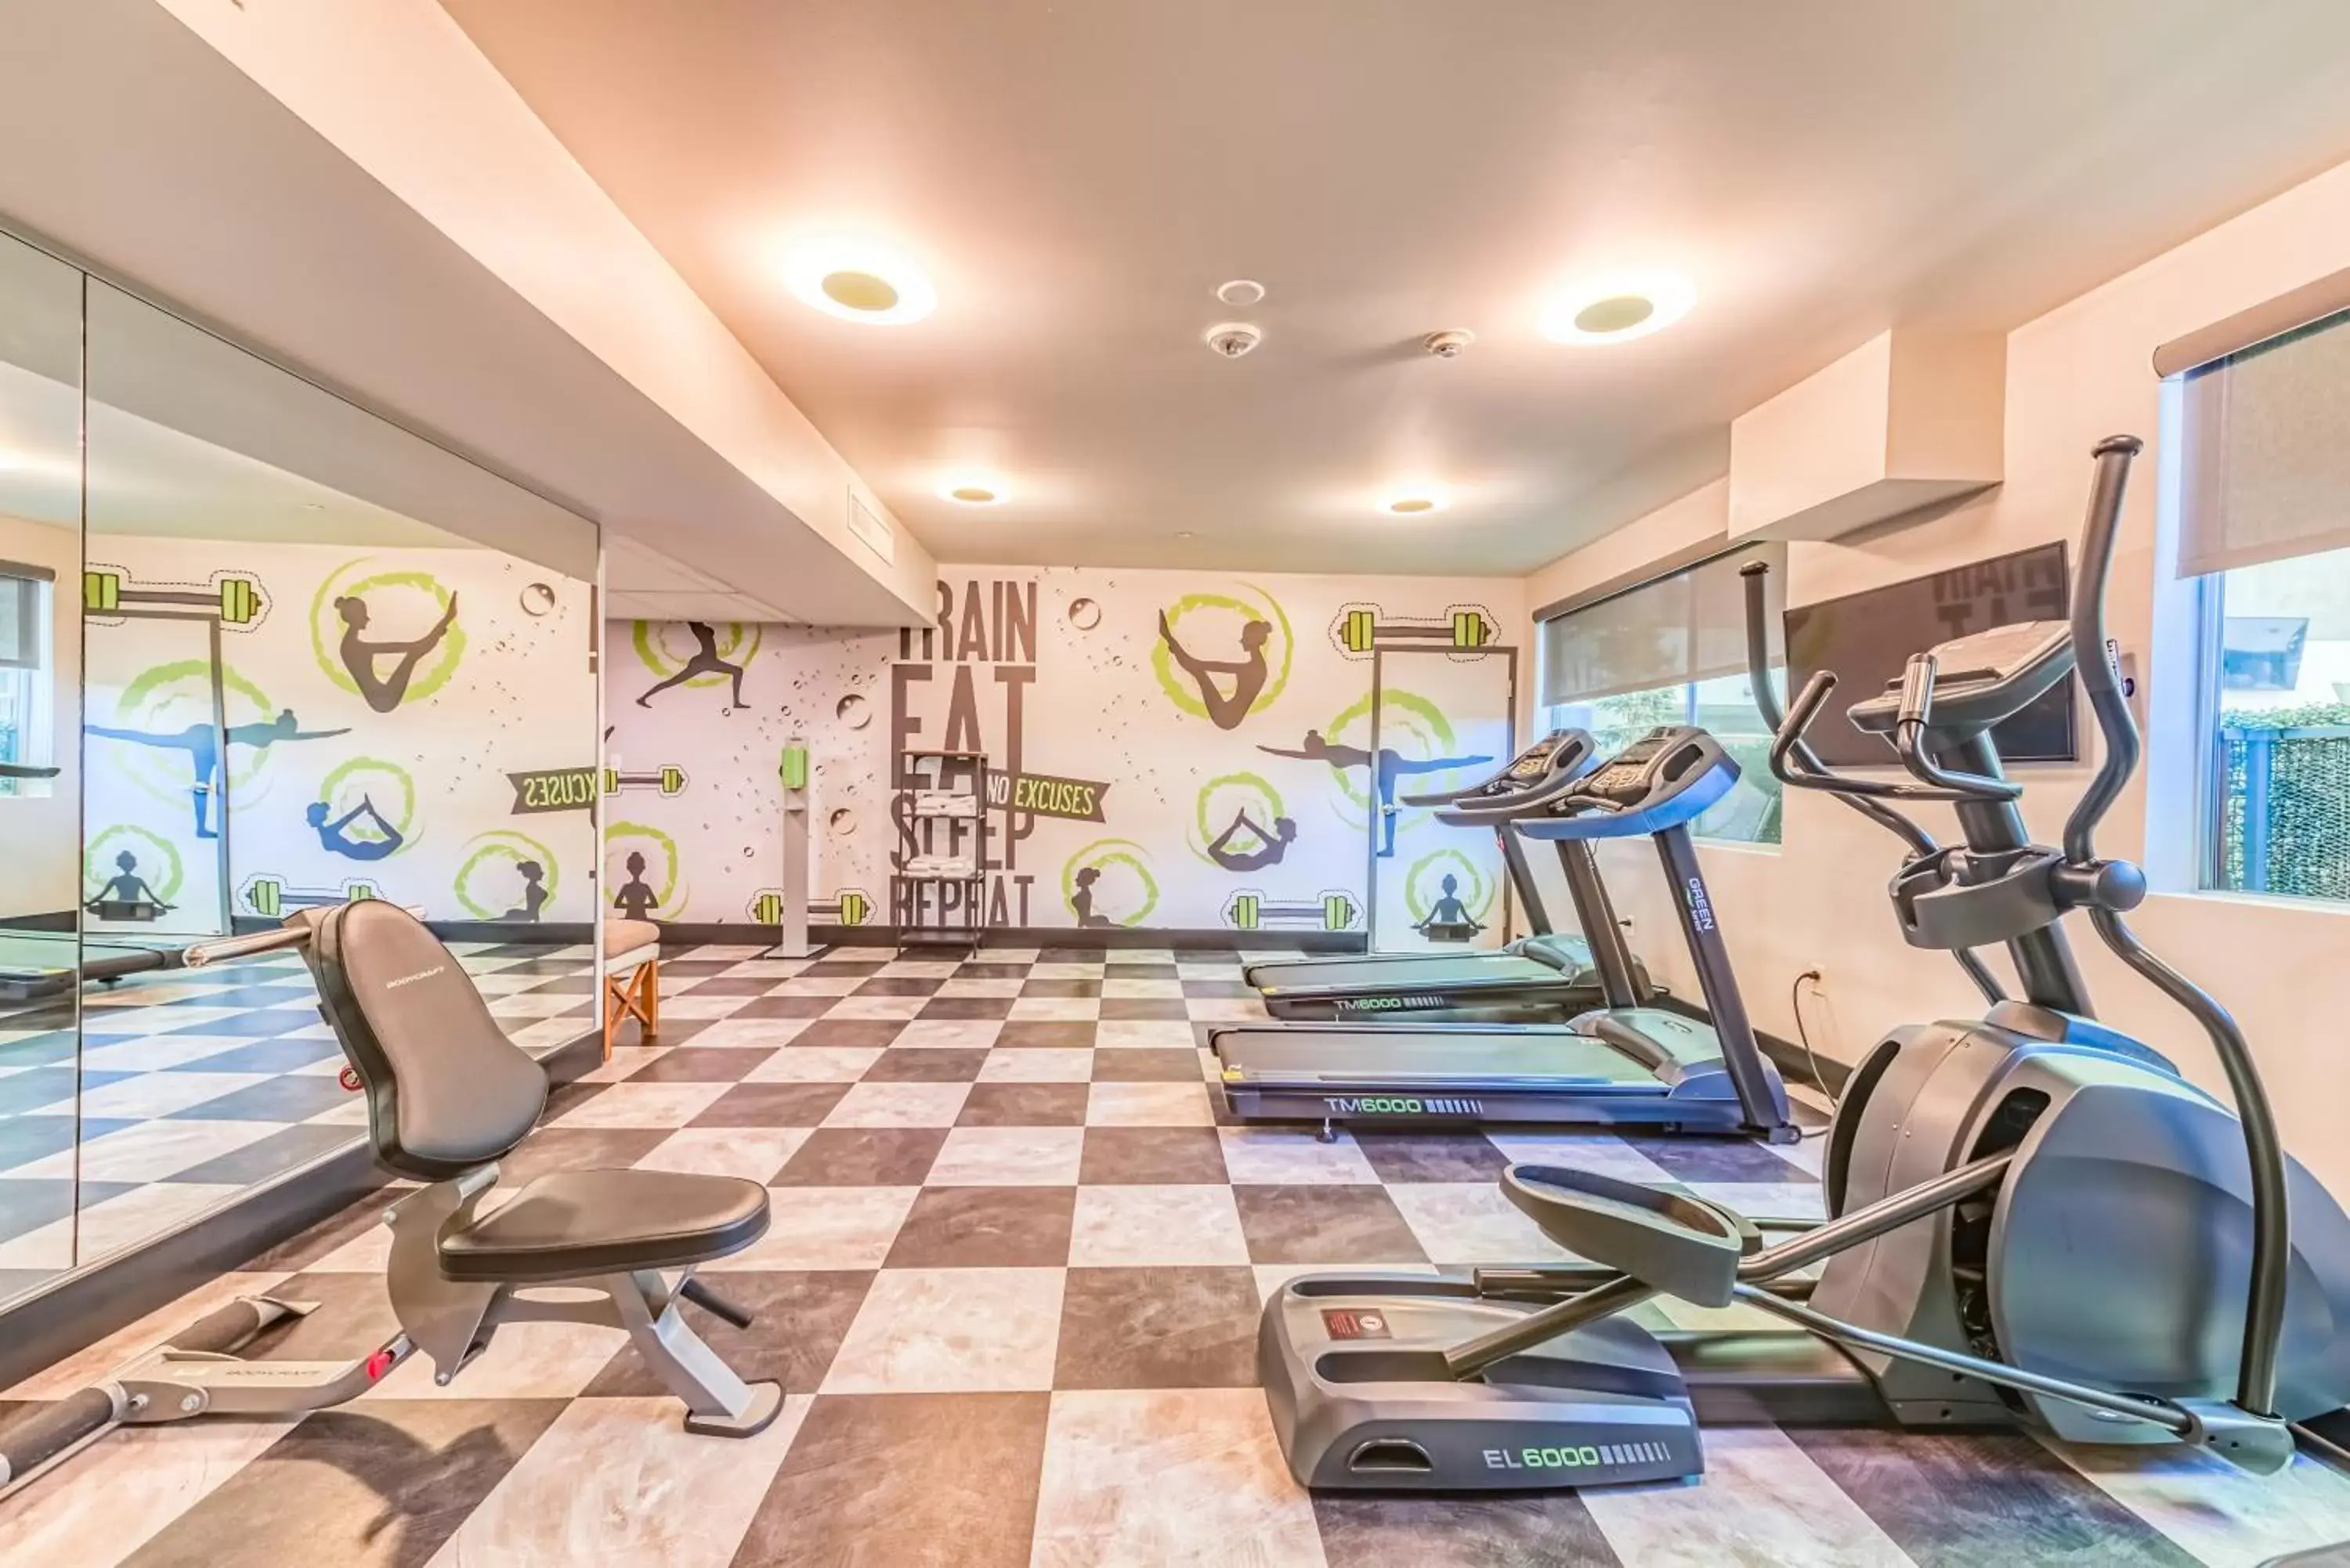 Fitness centre/facilities, Fitness Center/Facilities in Lexen Hotel - North Hollywood Near Universal Studios